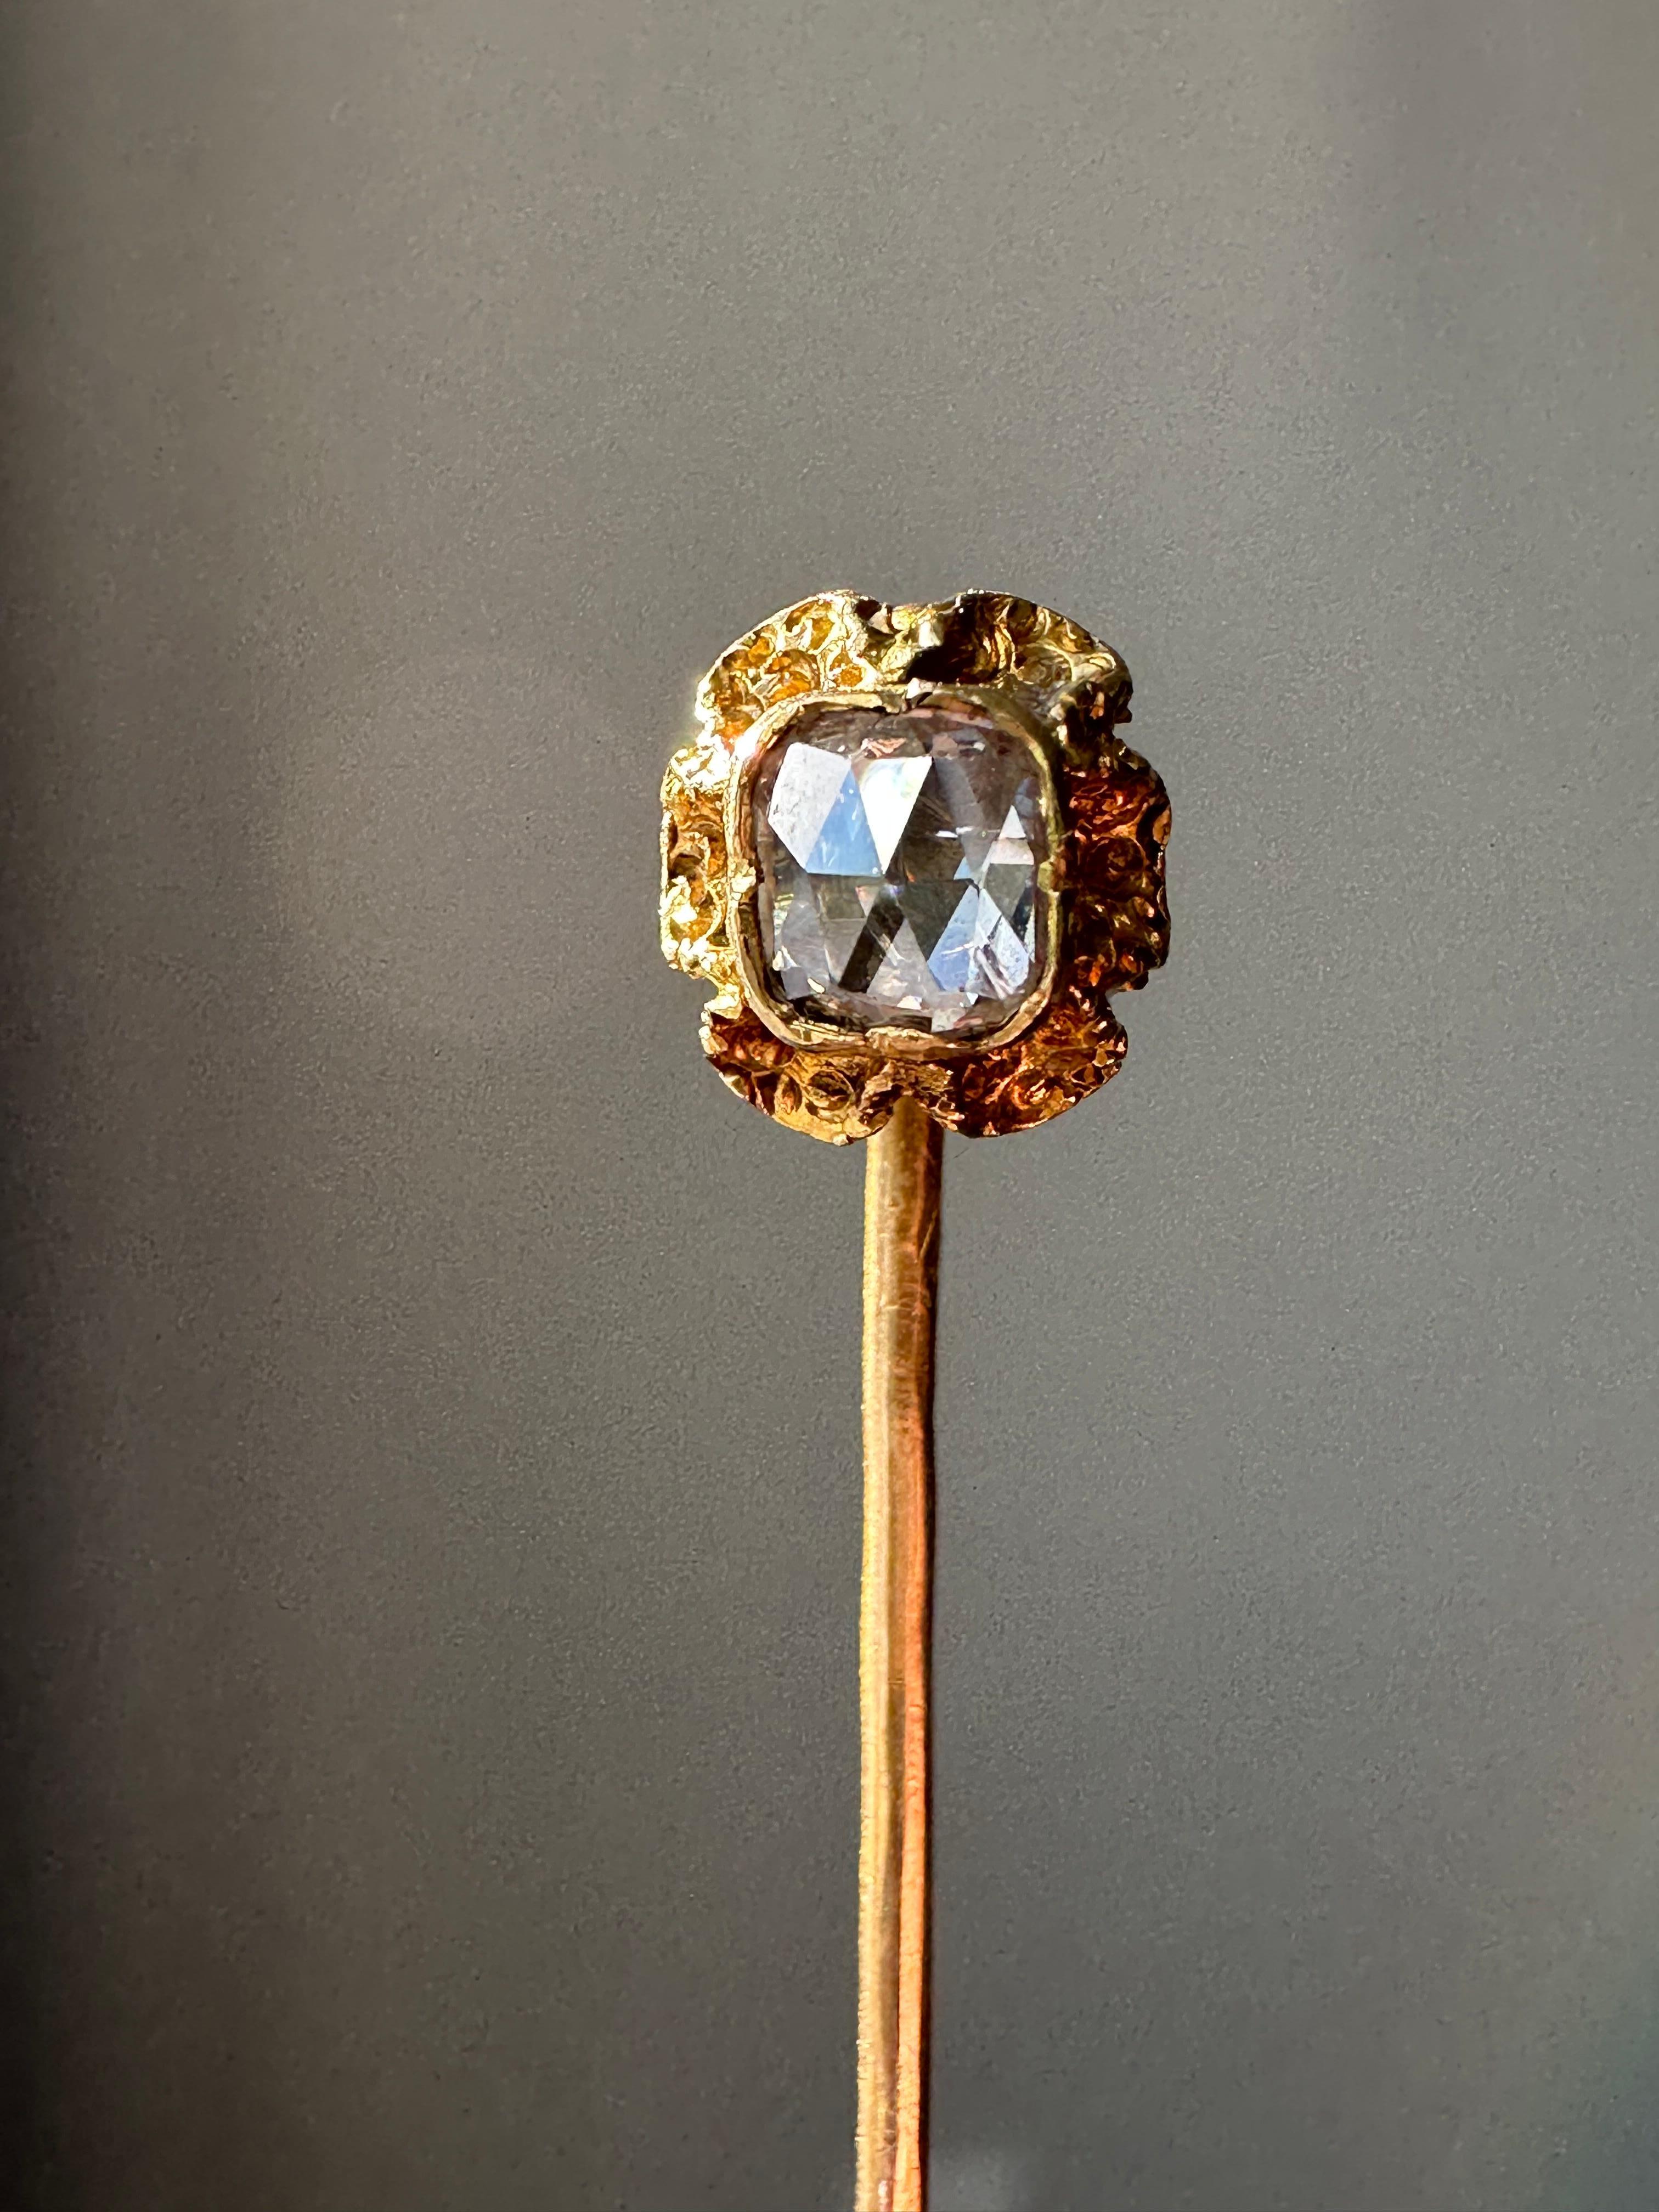 This early 19th century stick pin features all the making of an antique piece of French art: solid 18k gold, high quality engraving, and brilliant craftsmanship. Of course the main feature of the stick pin is the elongated rose cut diamond placed